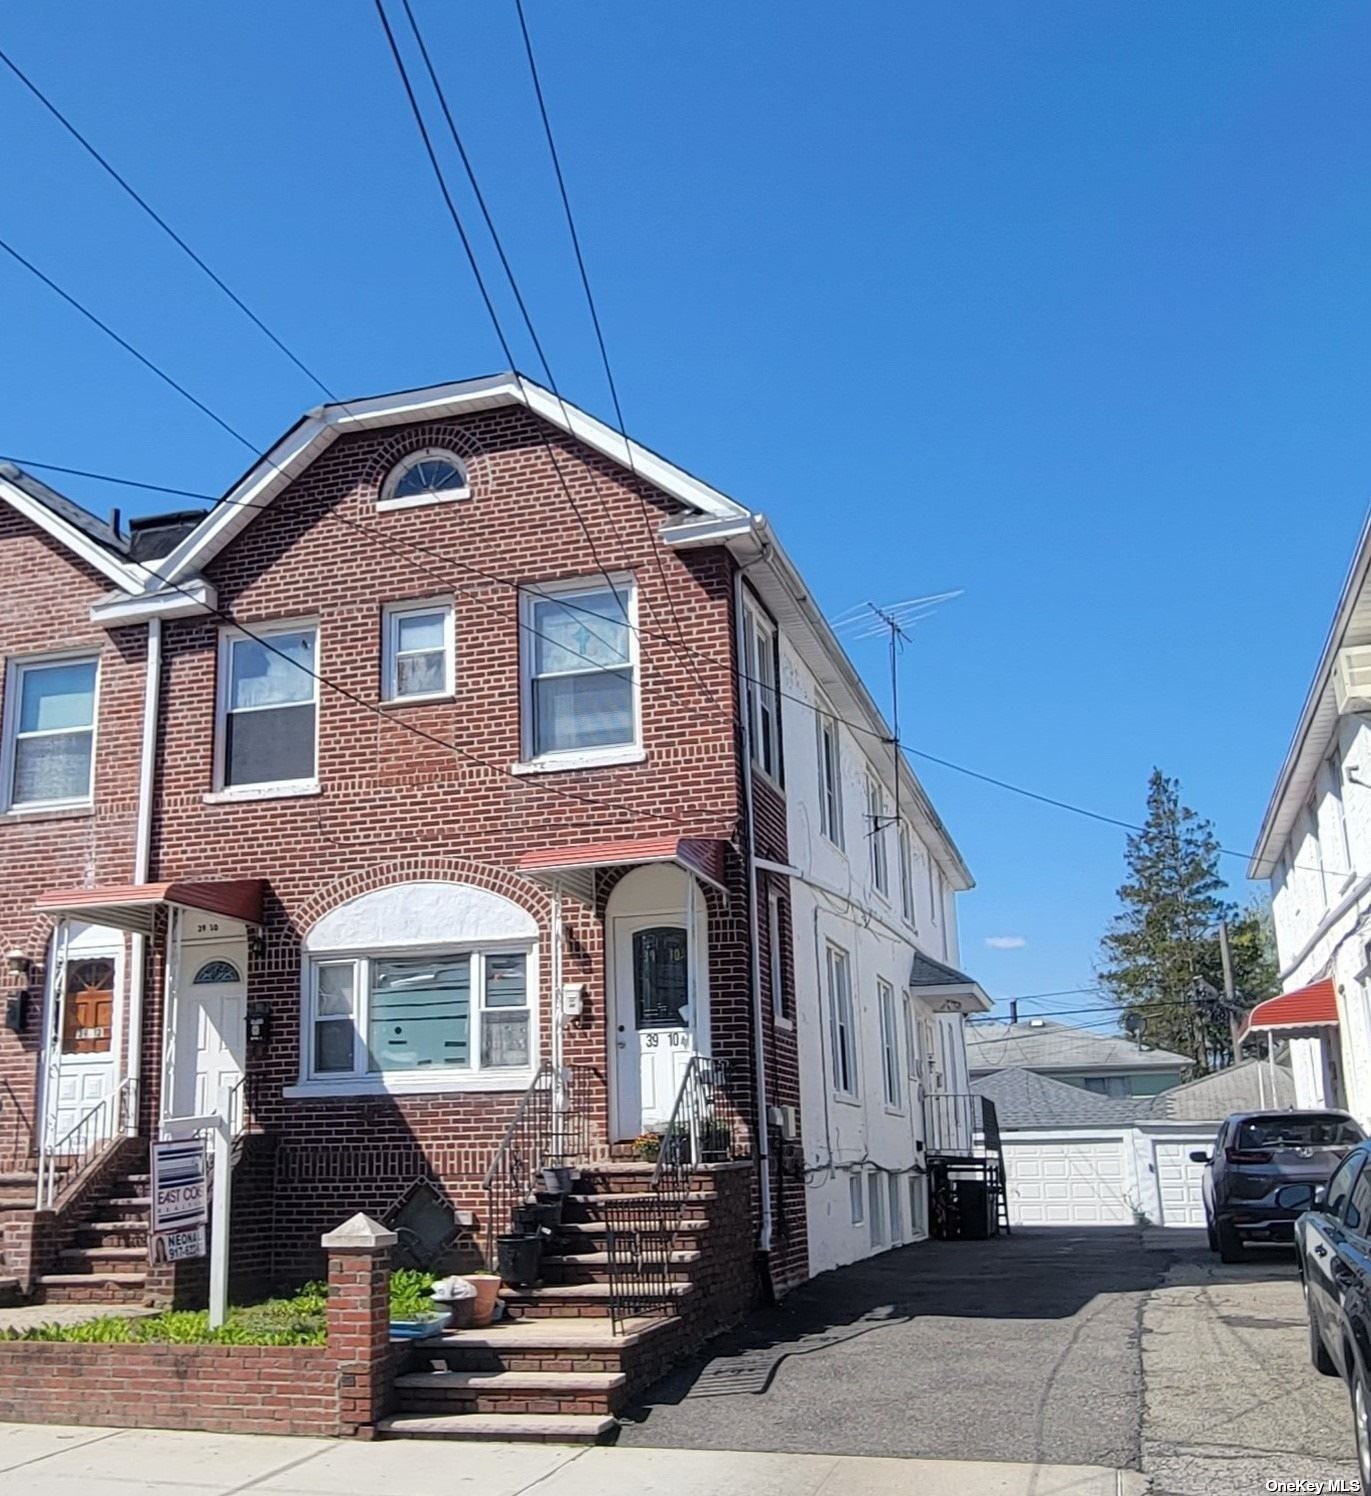 5 Family Building in Bayside - 201st  Queens, NY 11361